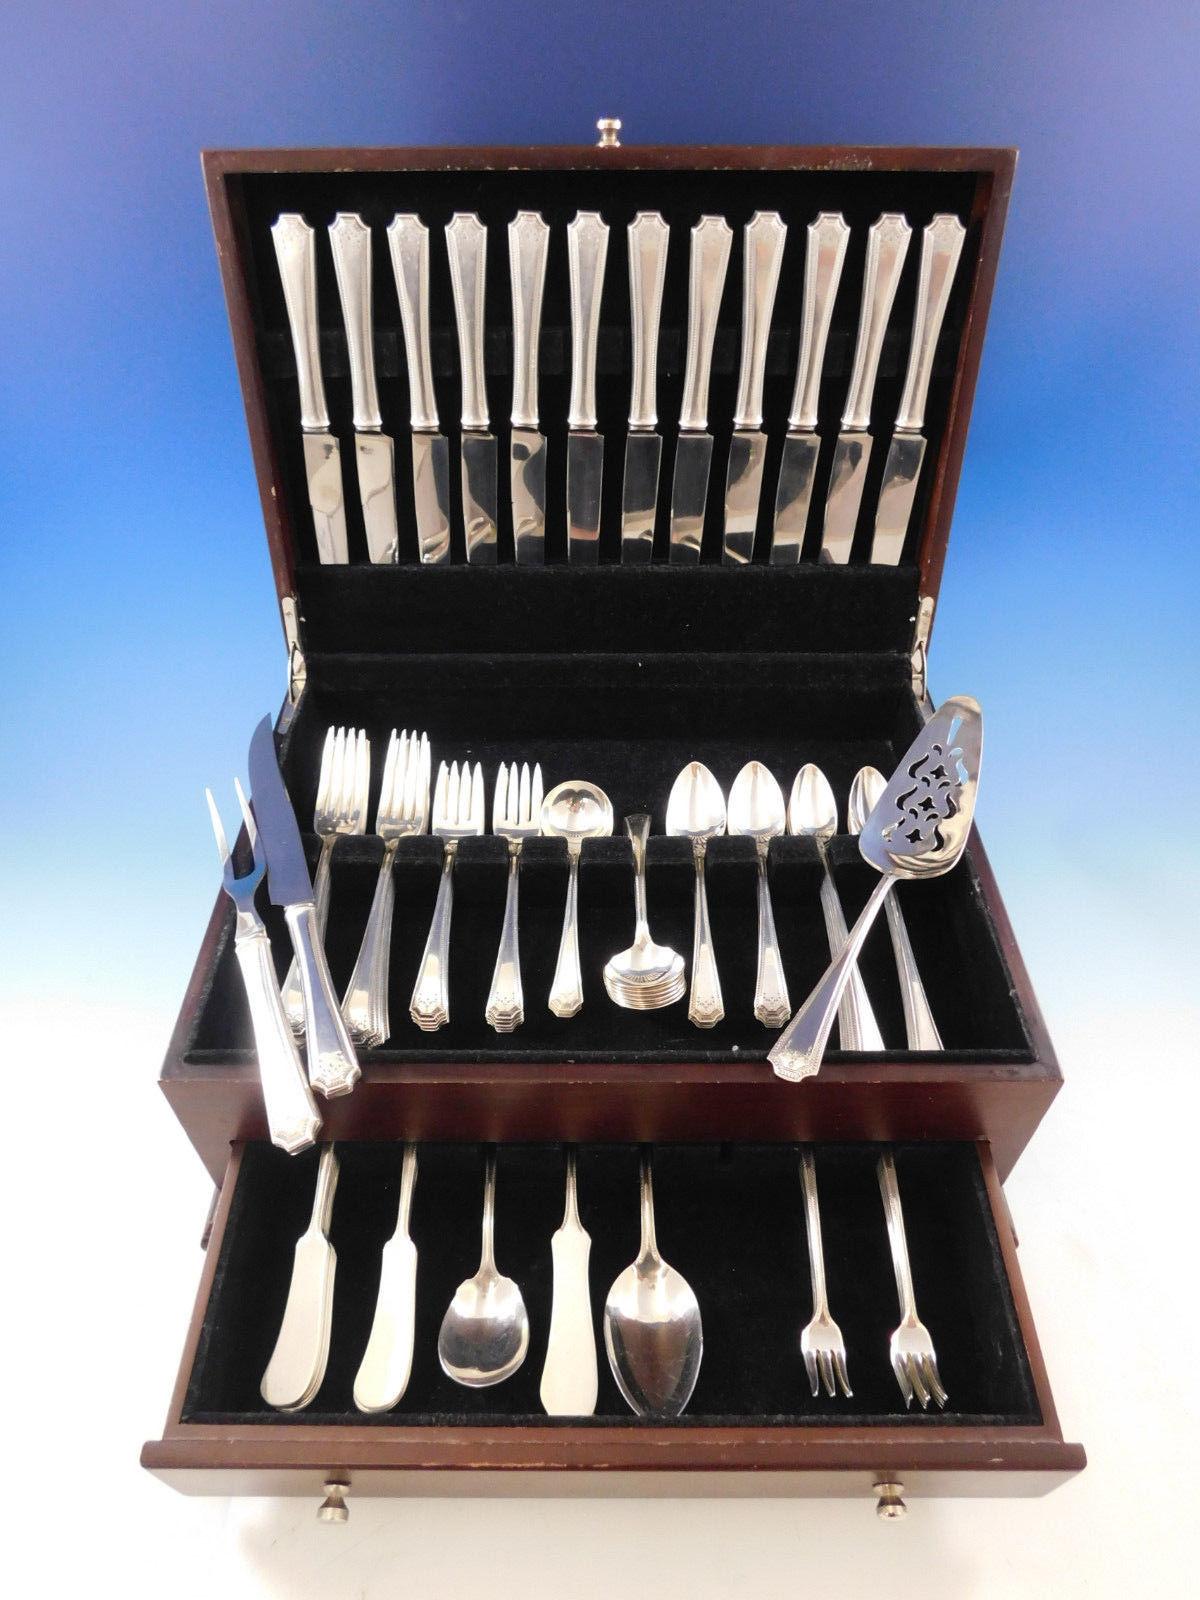 Monumental dinner size Adam by National circa 1917 sterling silver flatware set of 102 pieces. This set includes:

12 dinner size knives, 9 1/2